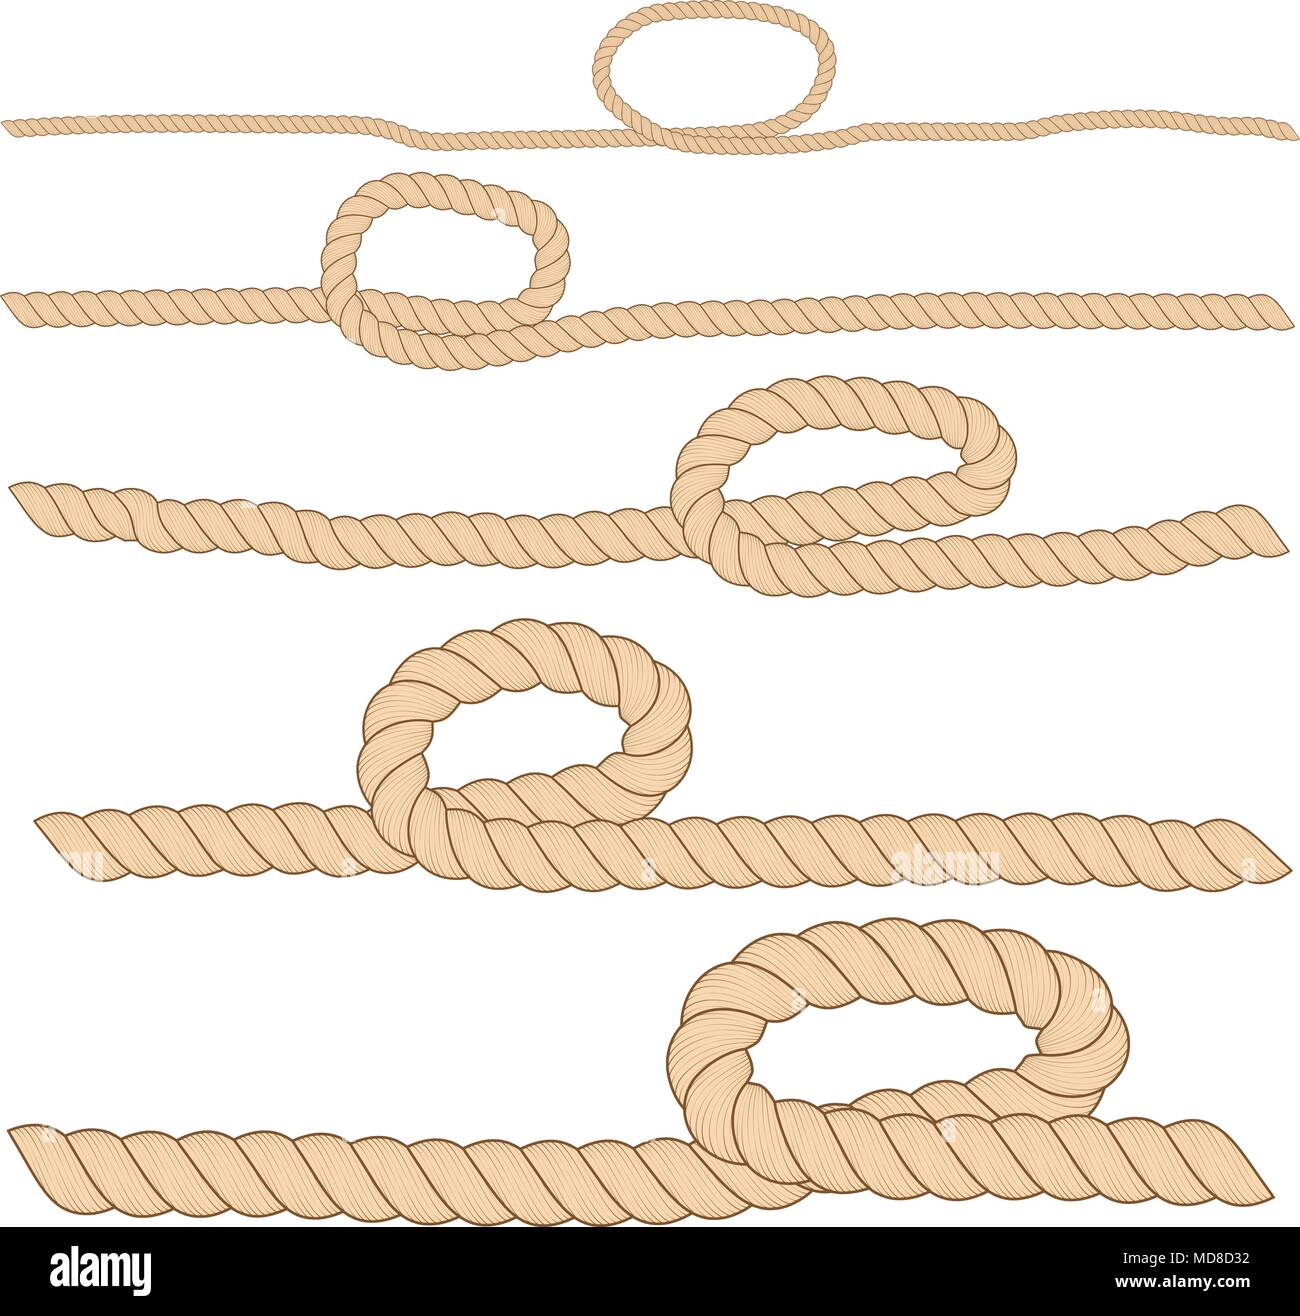 Set of horizontal brown ropes with loops are isolated on white background. Stock Vector